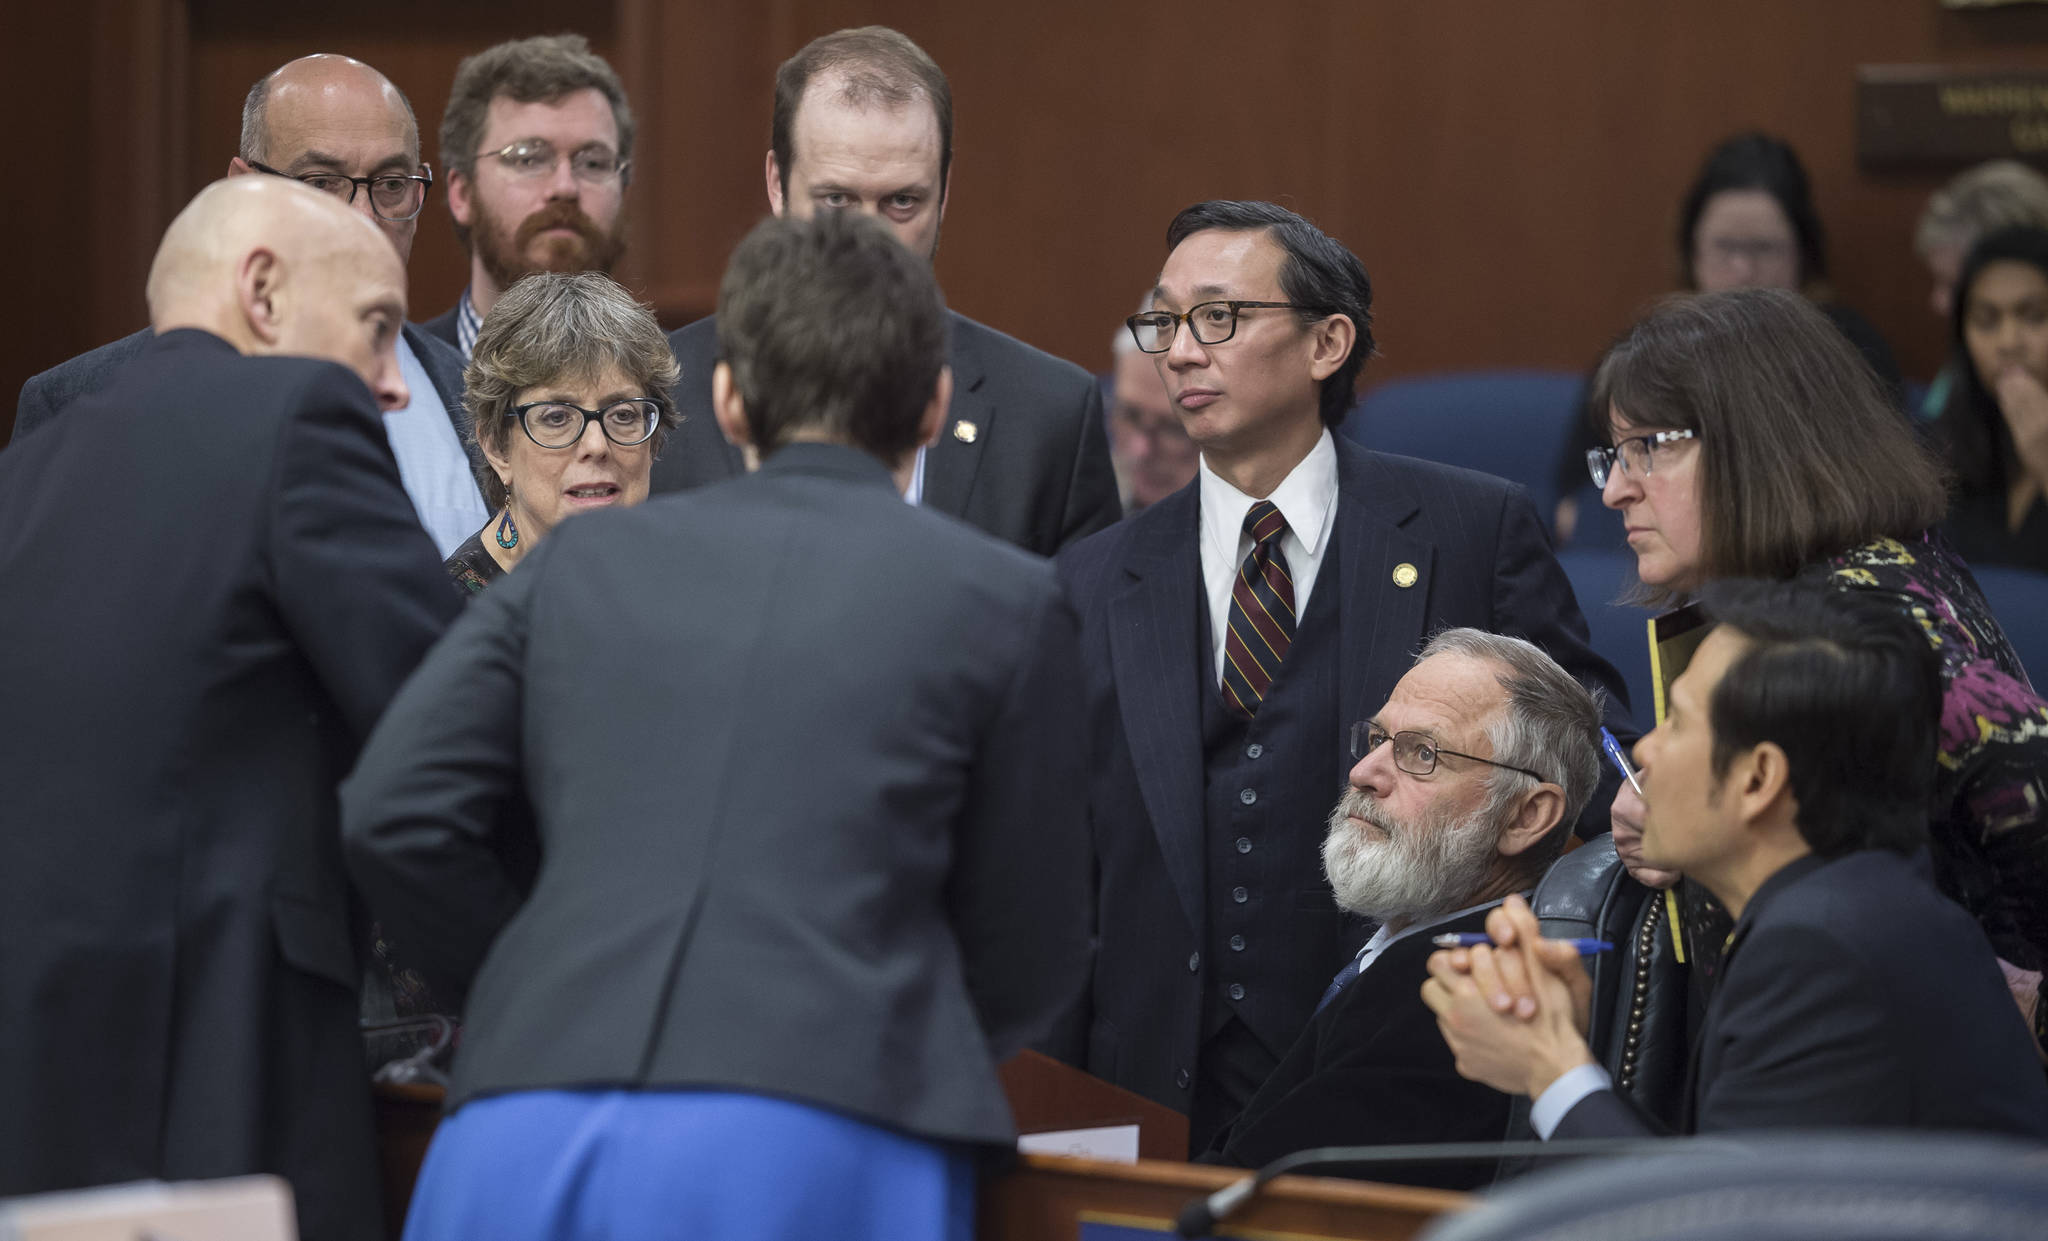 Members of the House Majority Caucus speak to each other at the Capitol on Wednesday, Feb. 7, 2018. Next year, lawmakers will be required to operate under a new conflict-of-interest law. (Michael Penn | Juneau Empire file)